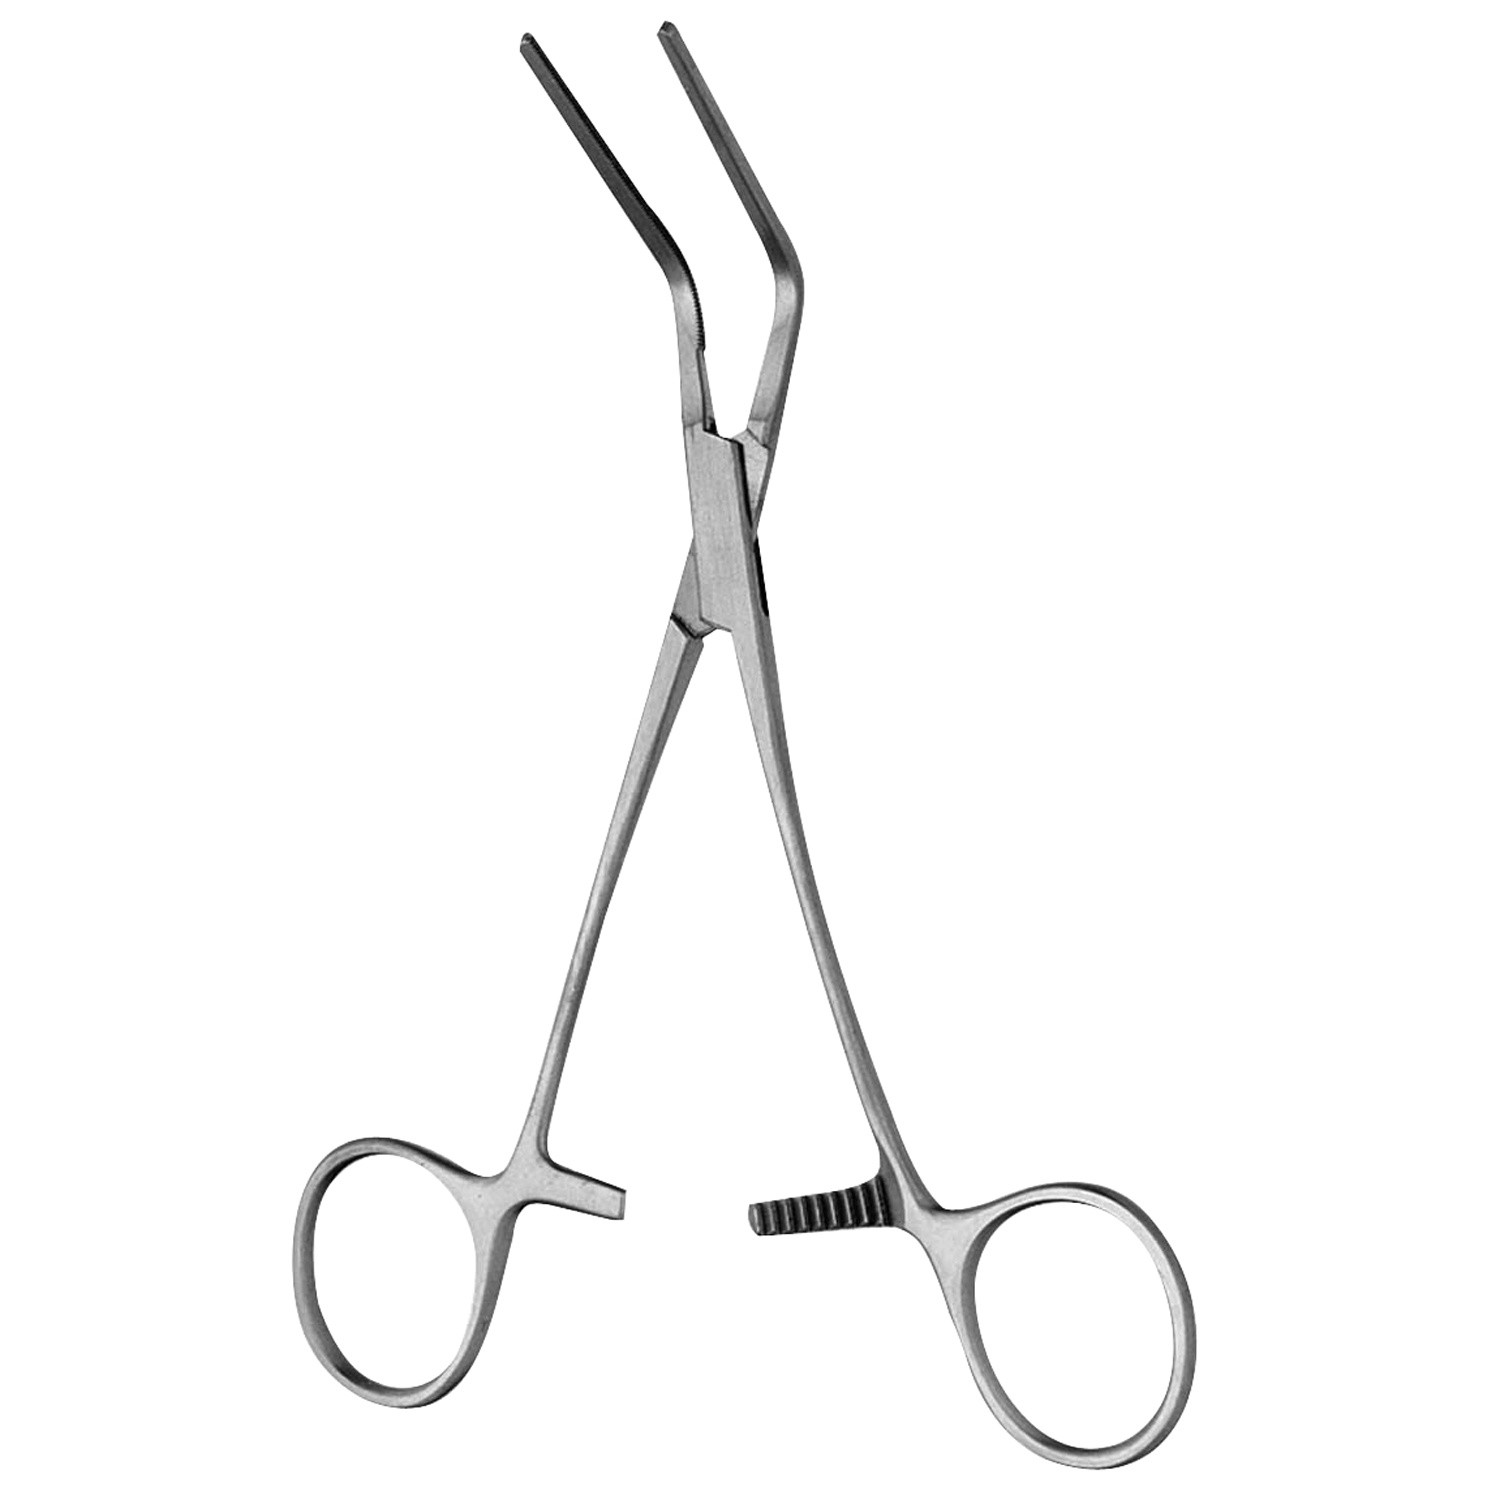 Cooley Peripheral Vascular Clamp, Curved Shanks, Jaws Angled 45 Degrees, Jaws 4.5 Cm, 7" (17.8 Cm)